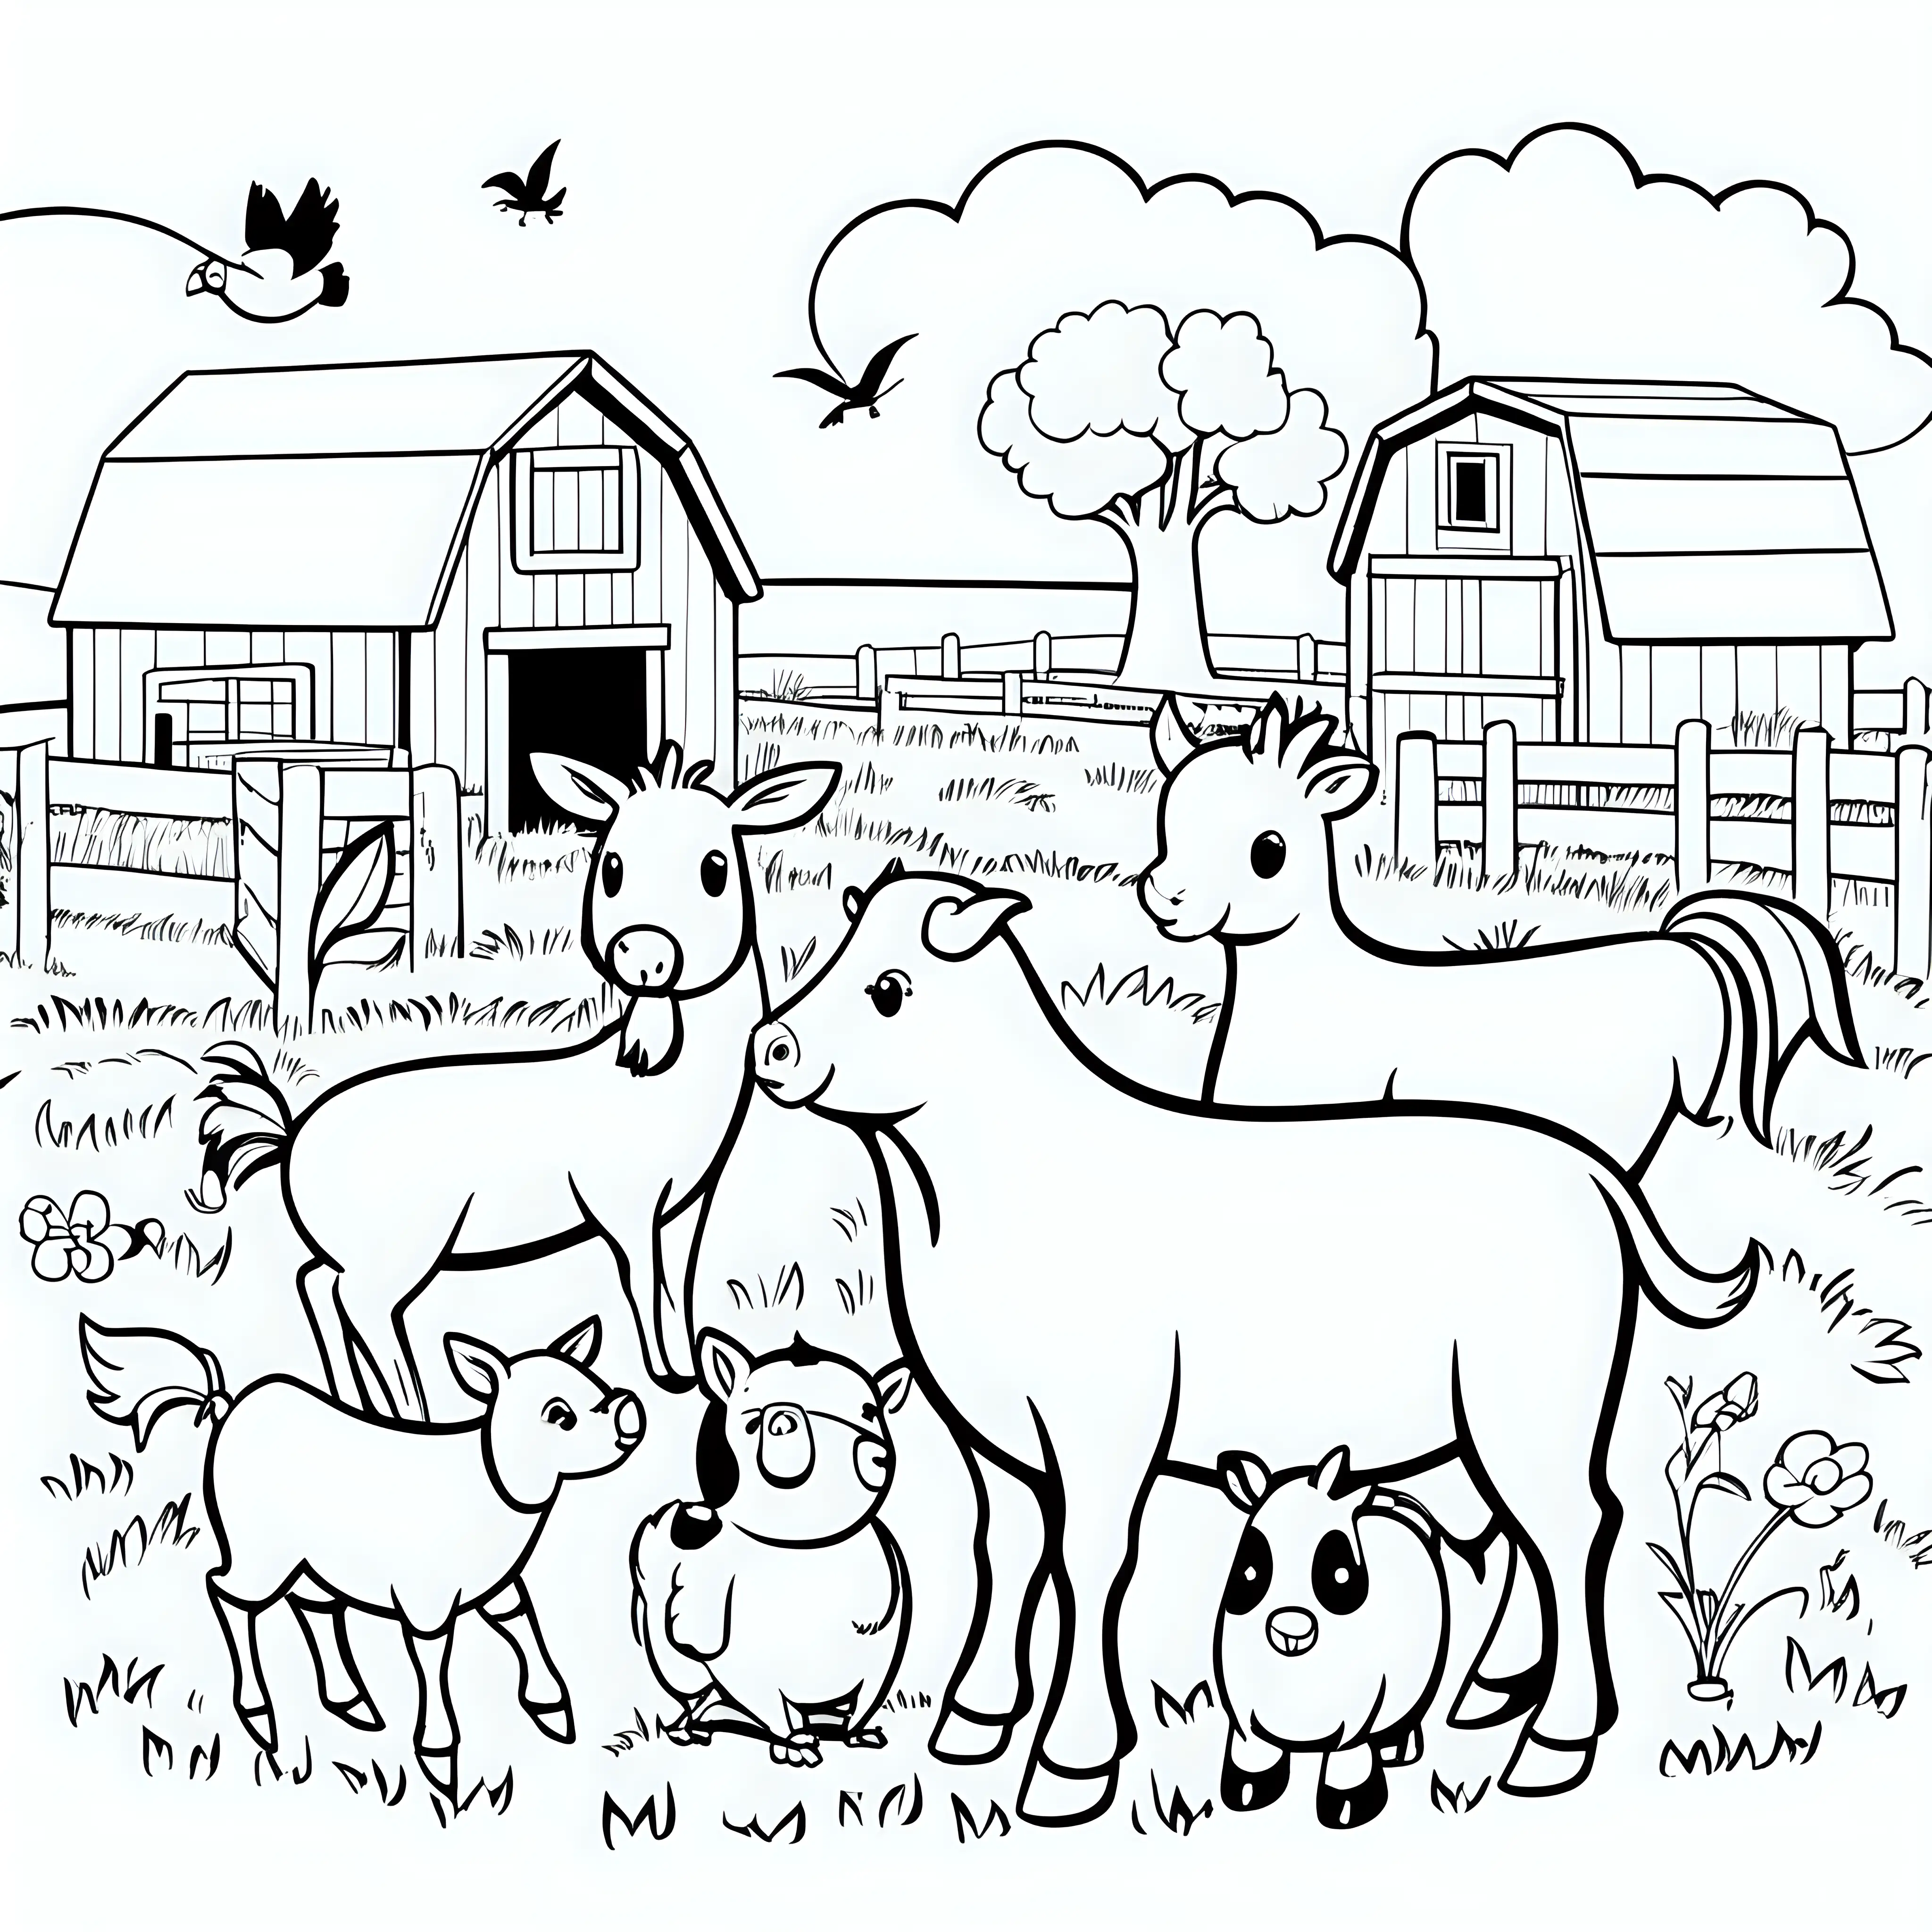 Farmyard Animals Coloring Page for Children Simple Black Line Drawings